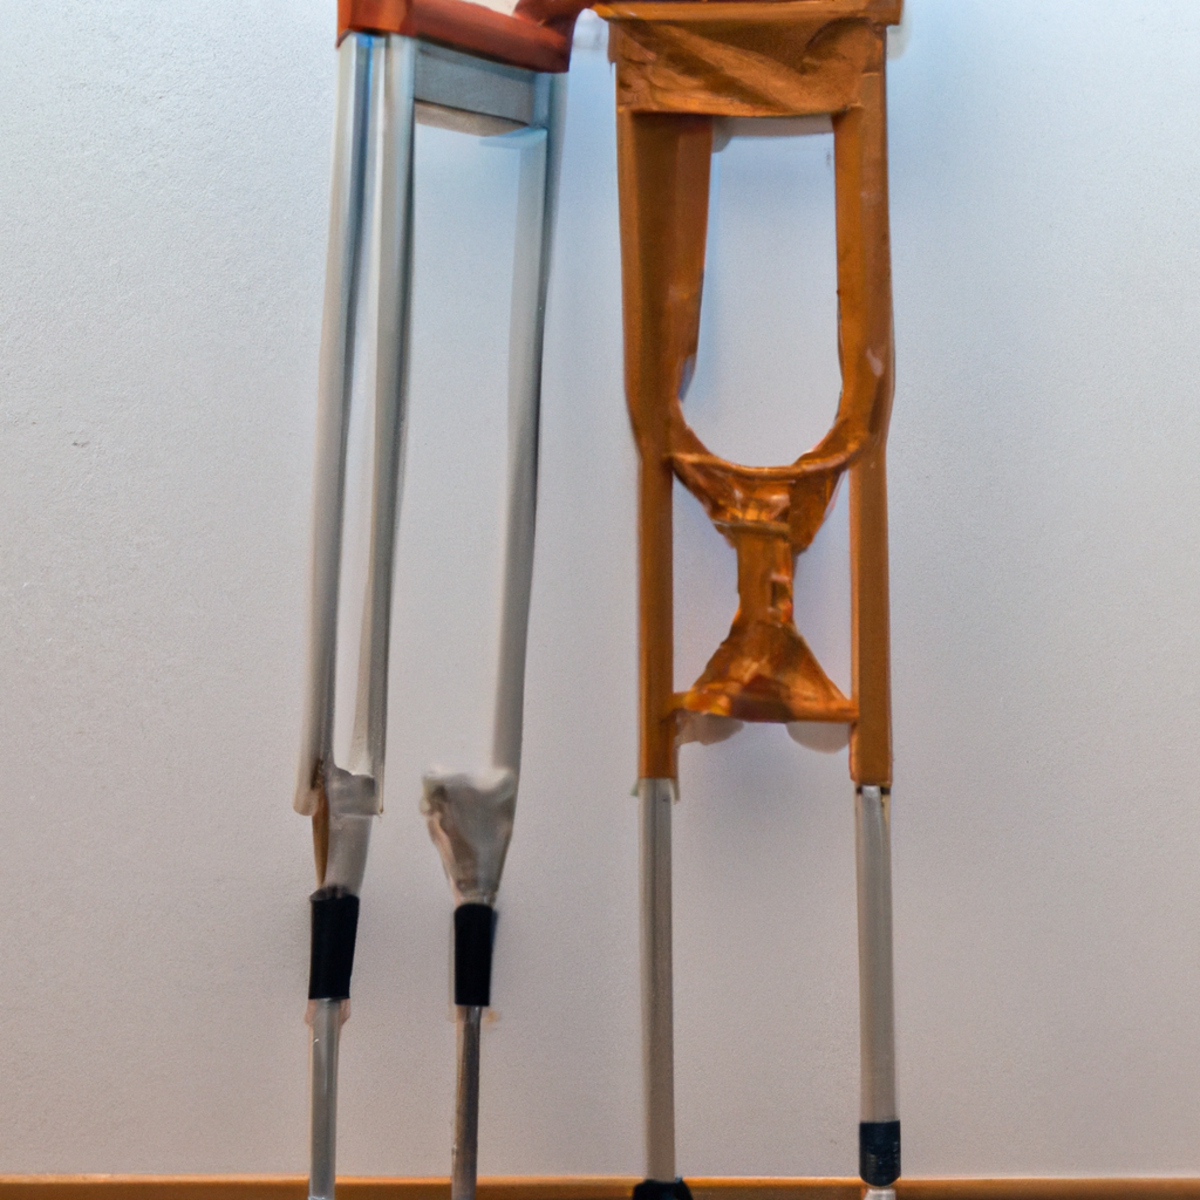 Symbolic objects representing resilience and triumph: crutches, books, and a candle, capturing survivors' stories - Jansen's Metaphyseal Chondrodysplasia